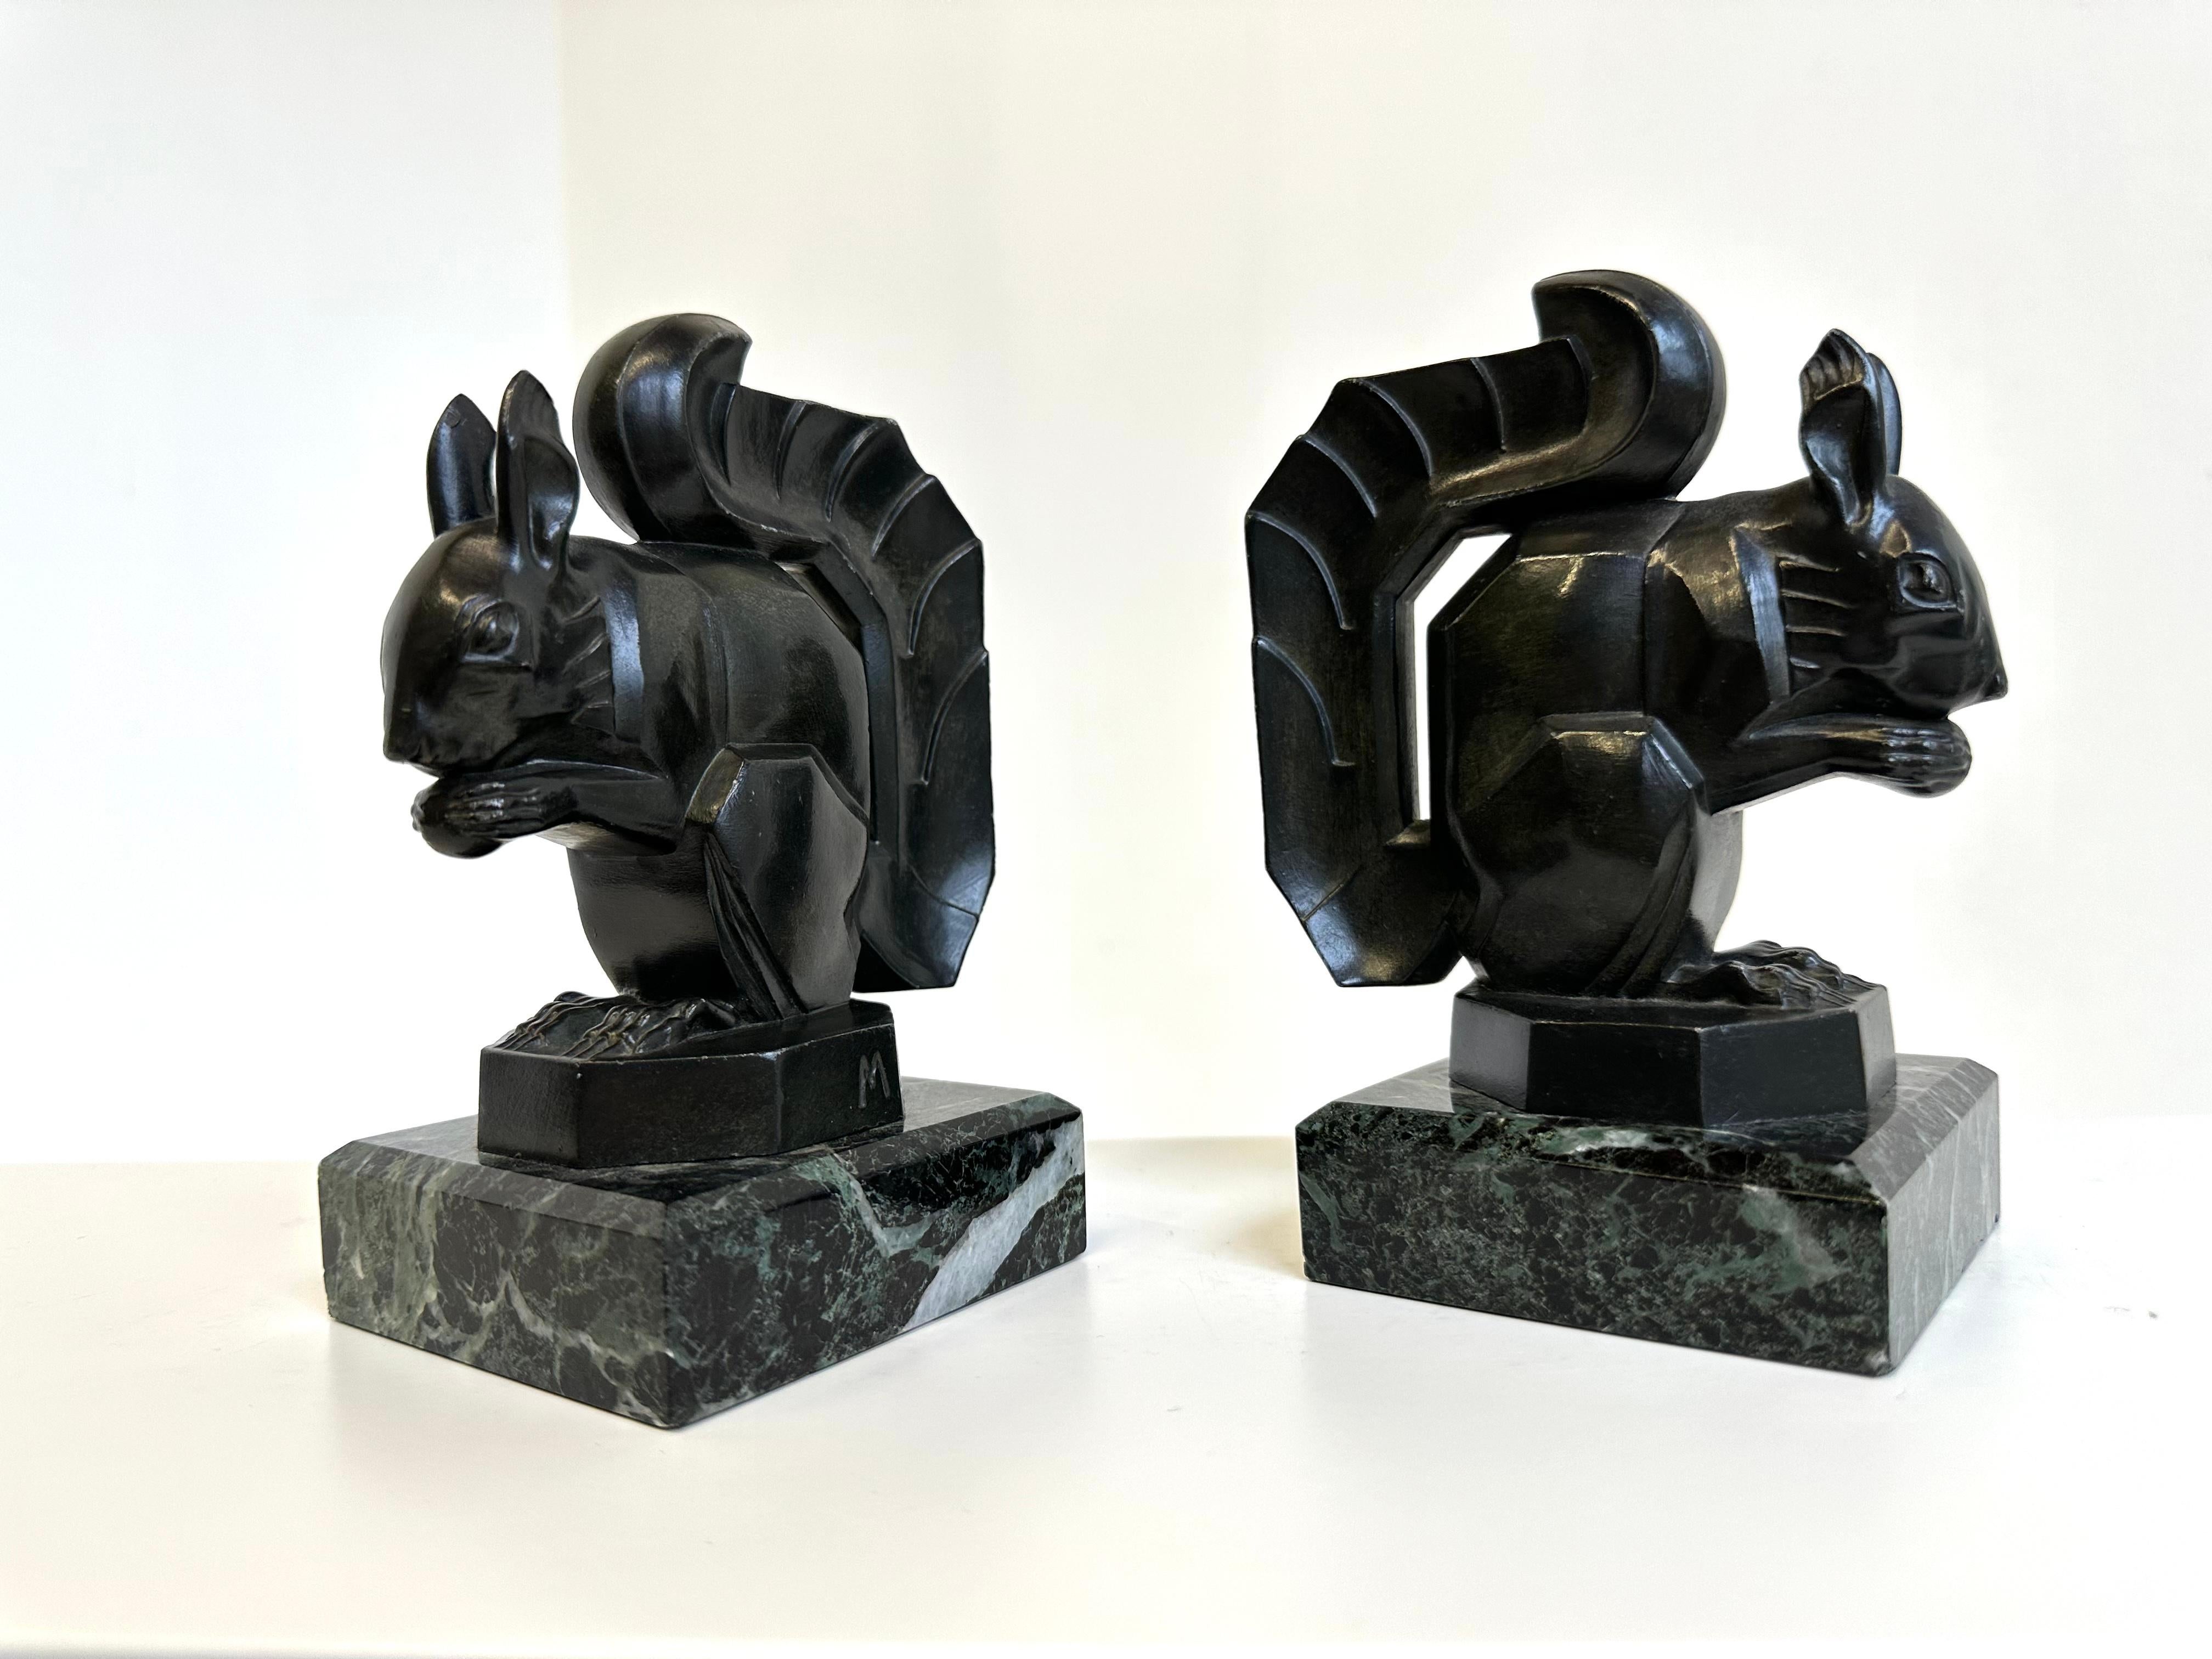 Antique Art Deco ''Squirrel'' Bookends by Max Le Verrier 1930 France Marble For Sale 3